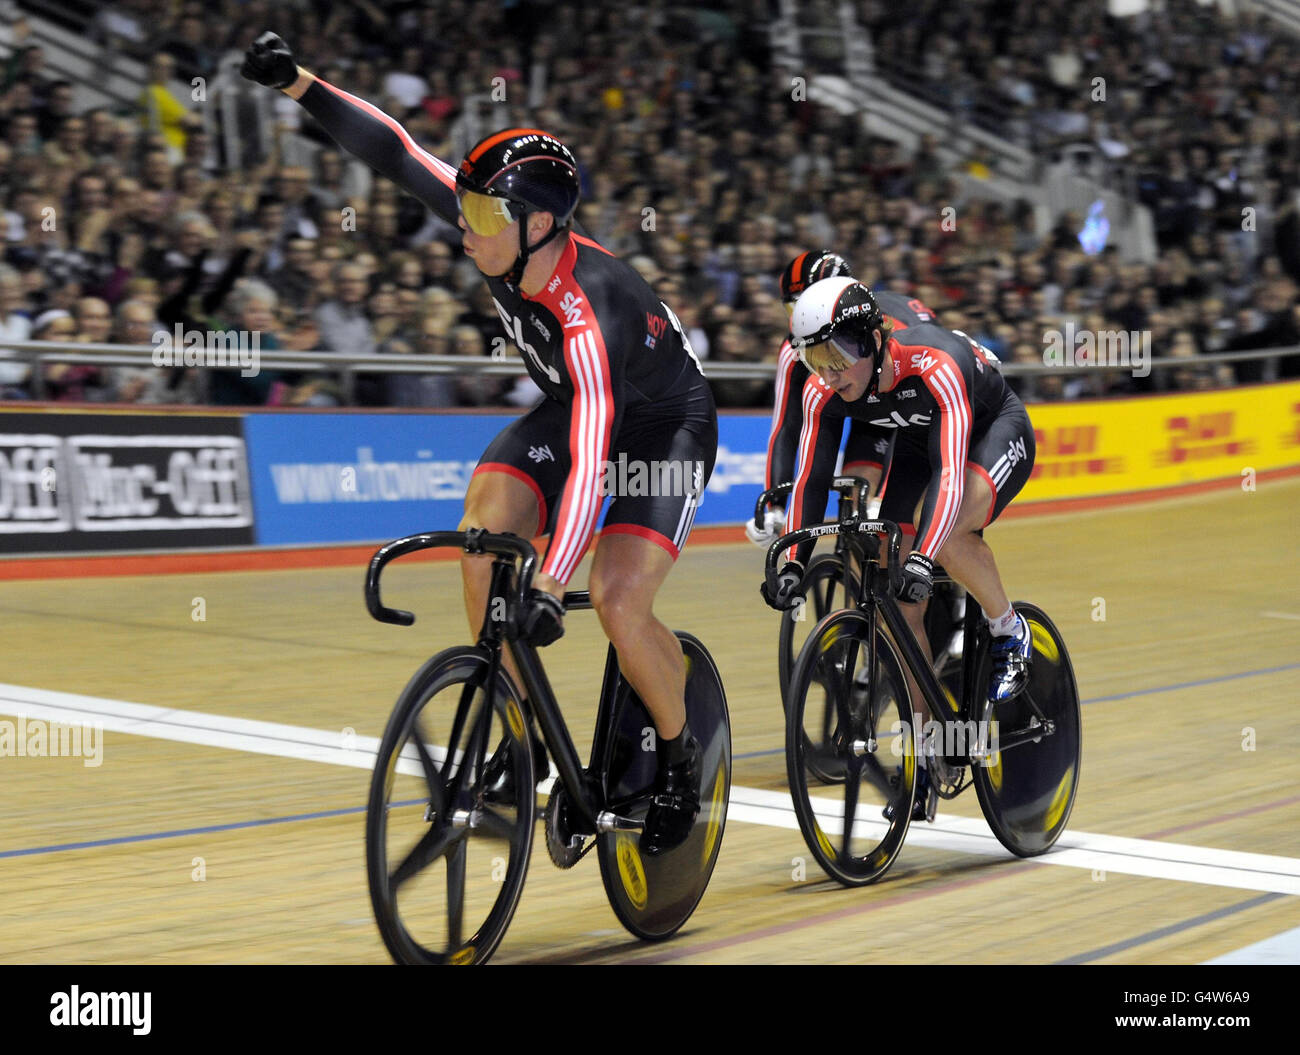 Sir Chris Hoy celebrates as he beats Jason Kenny to win the Mens Keirin during the Cycling Revolution Track Series at Manchester Velodrome, Manchester. Stock Photo